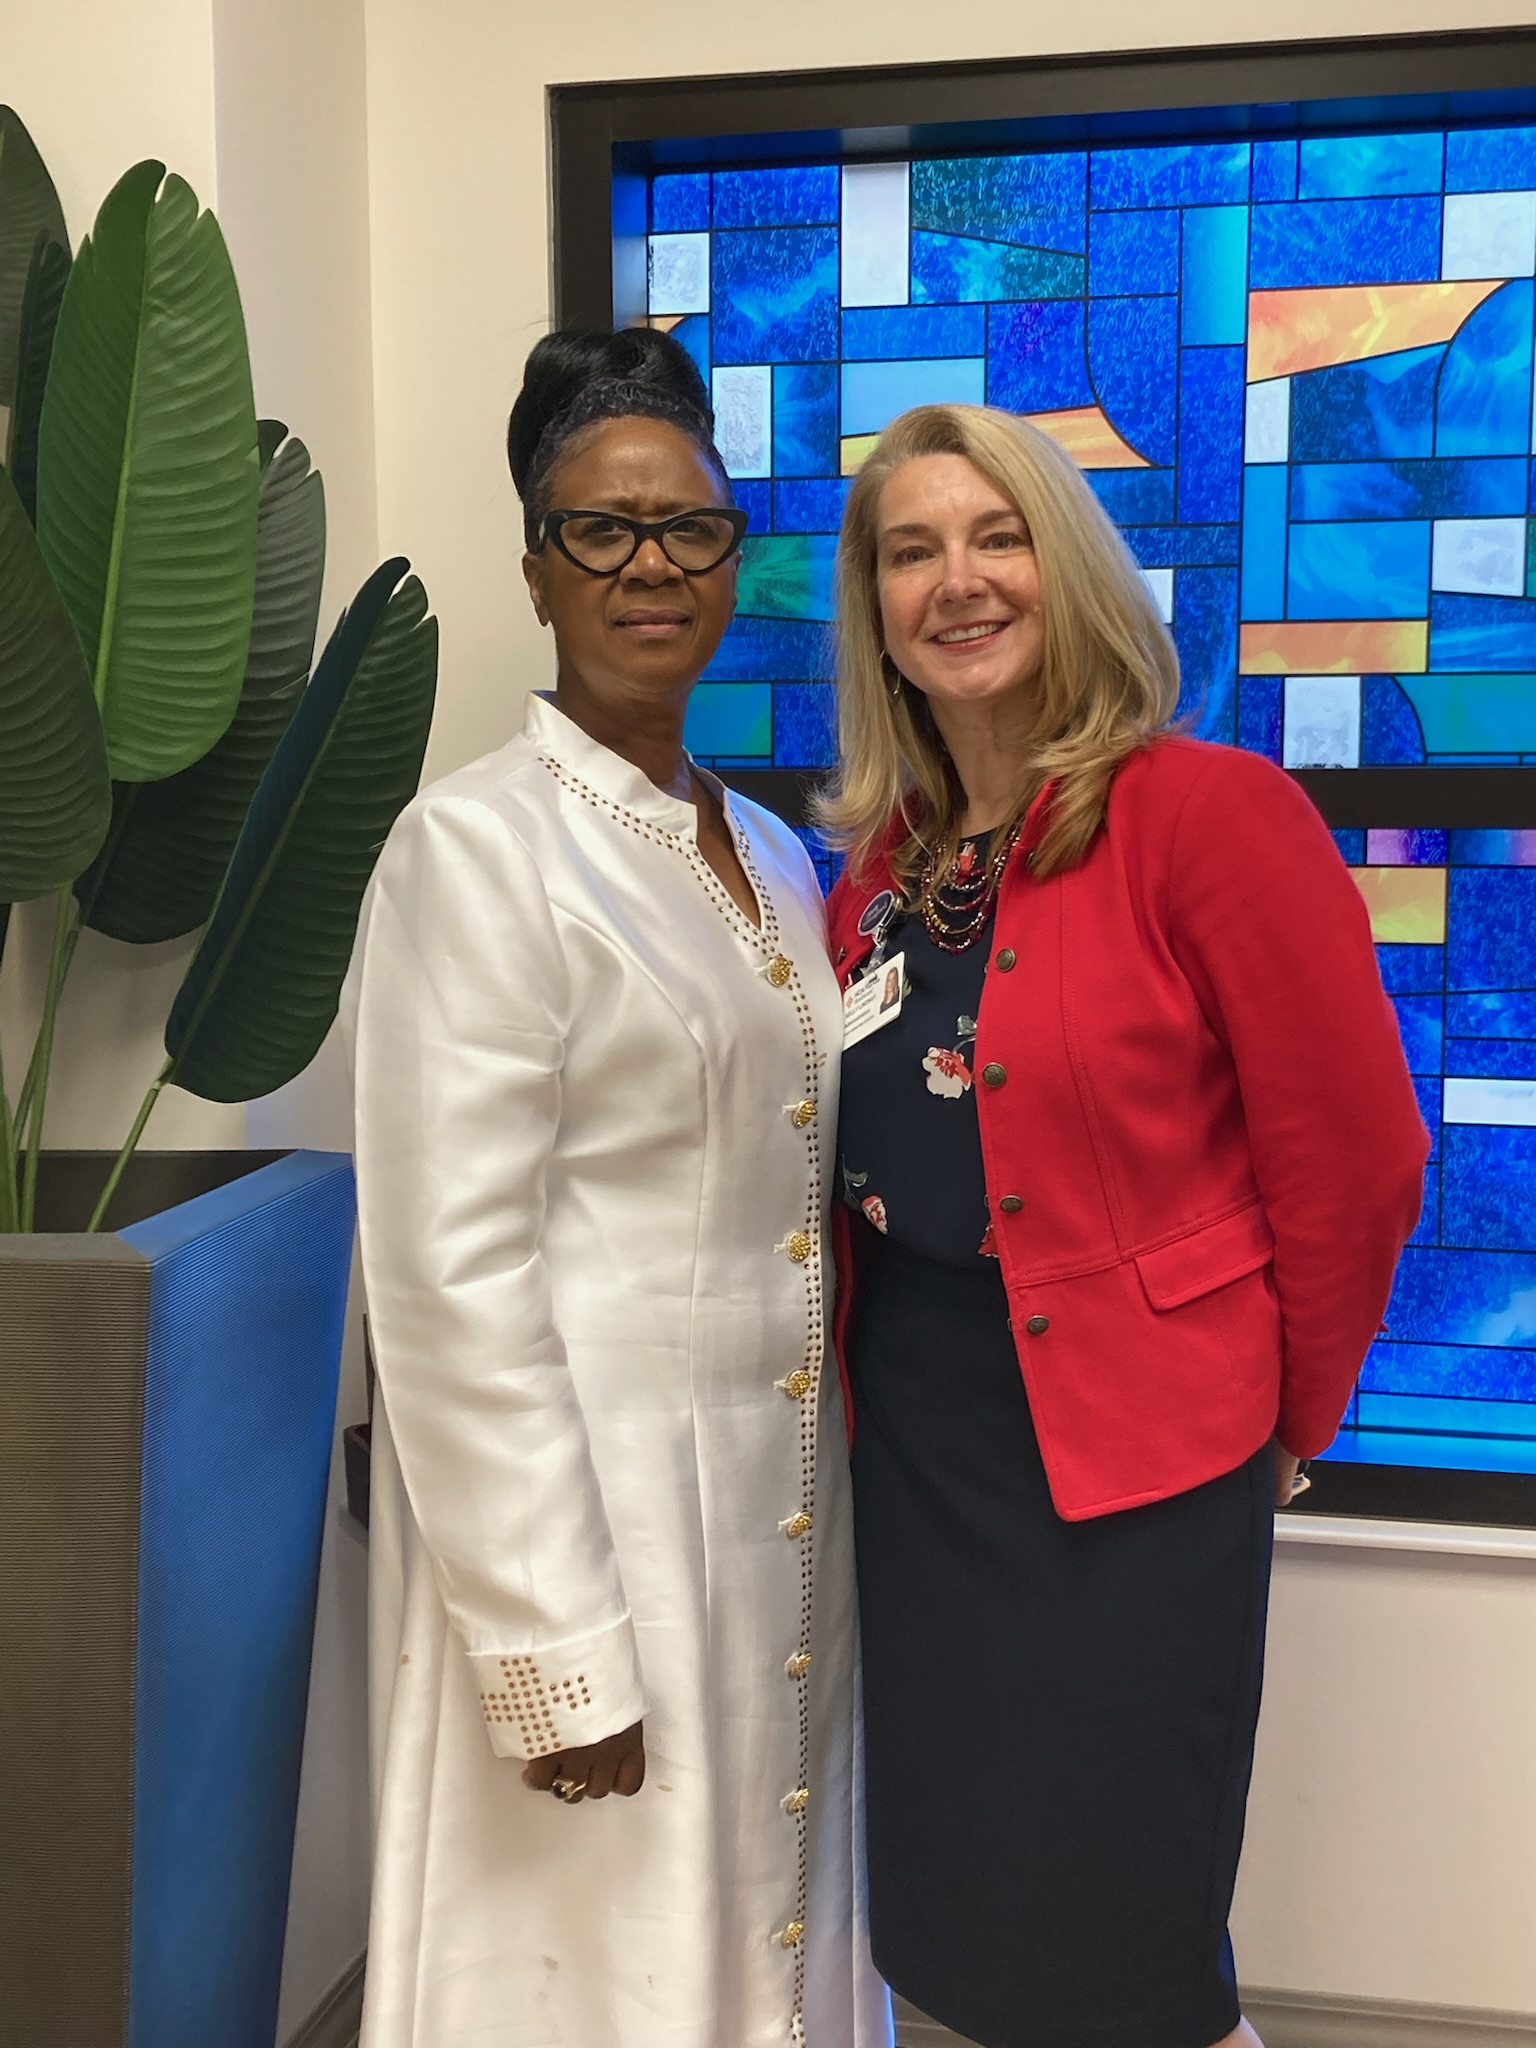 Angela Anderson, pastoral care manager and Kelly Lindsay, chief operating officer (COO) of HCA Florida Brandon Hospital are pictured.